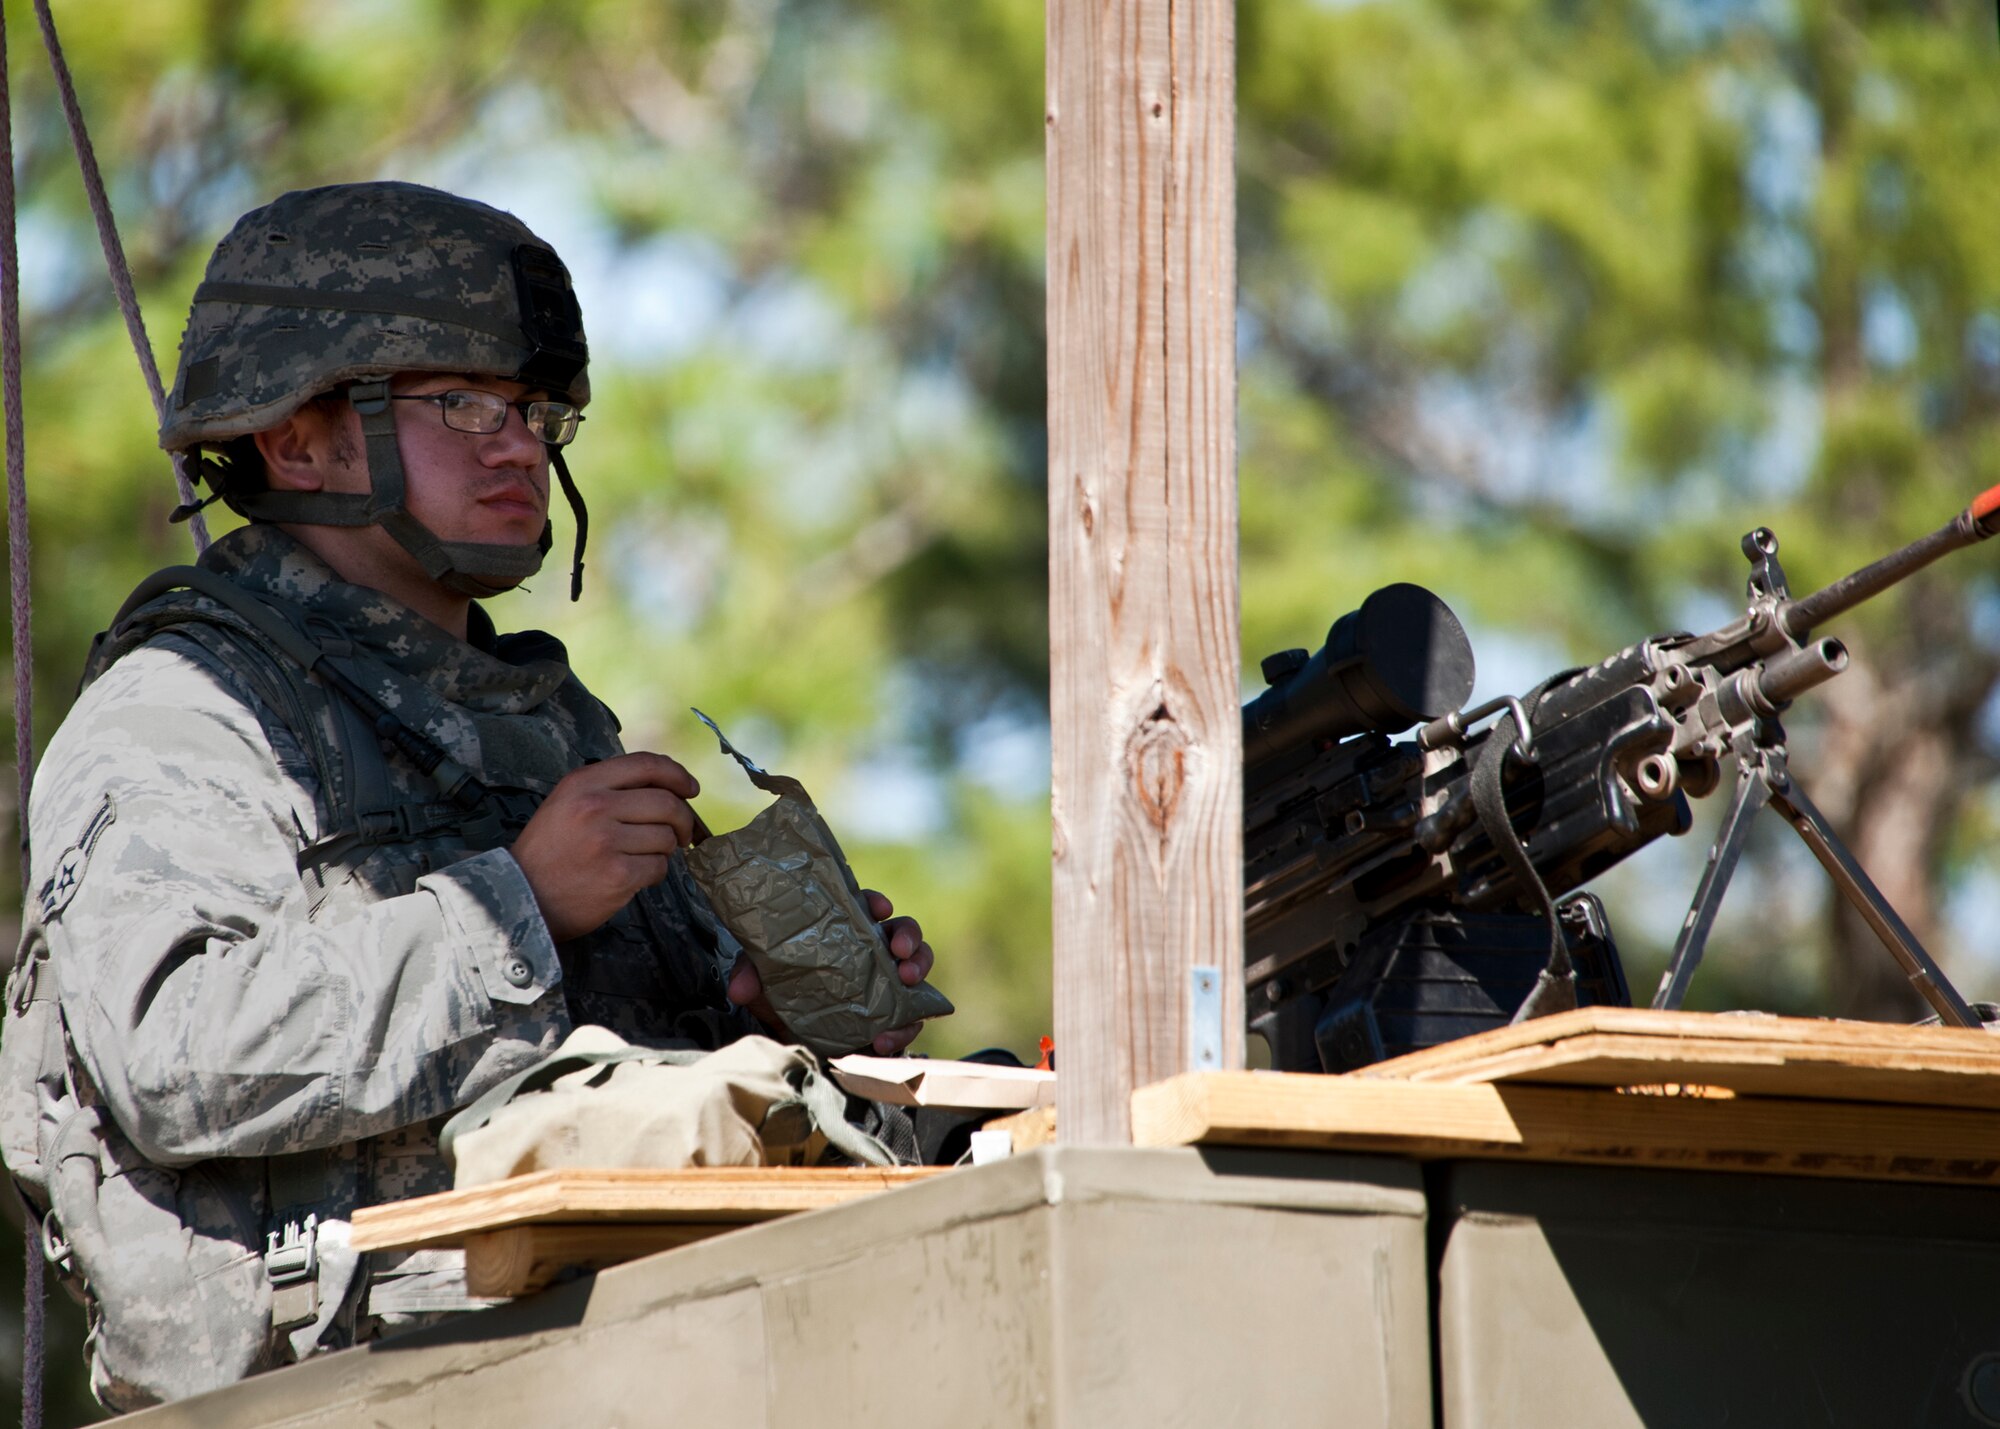 An Airman enjoys a snack while pulling a shift in one of the many towers posted along the perimeter of Base Tango during an exercise April 28 at Eglin Air Force Base, Fla.  The exercise was part of Air Force Materiel Command’s "Brave Defender" training, which is administered by the 96th Ground Combat Training Squadron.  ECP guards experienced random vehicle inspections, media visits and VBIEDs during posted shifts.   GCTS instructors push 10 training classes a year, which consists of IED detection and reaction, operating in an urban environment, mission planning, land navigation and casualty care.  The three-week training culminates with a three-day field training exercise where the Airmen apply what they learned in combat scenarios.  More than 140 Airmen from more than 10 locations attended this training.  (U.S. Air Force photo/Samuel King Jr.)